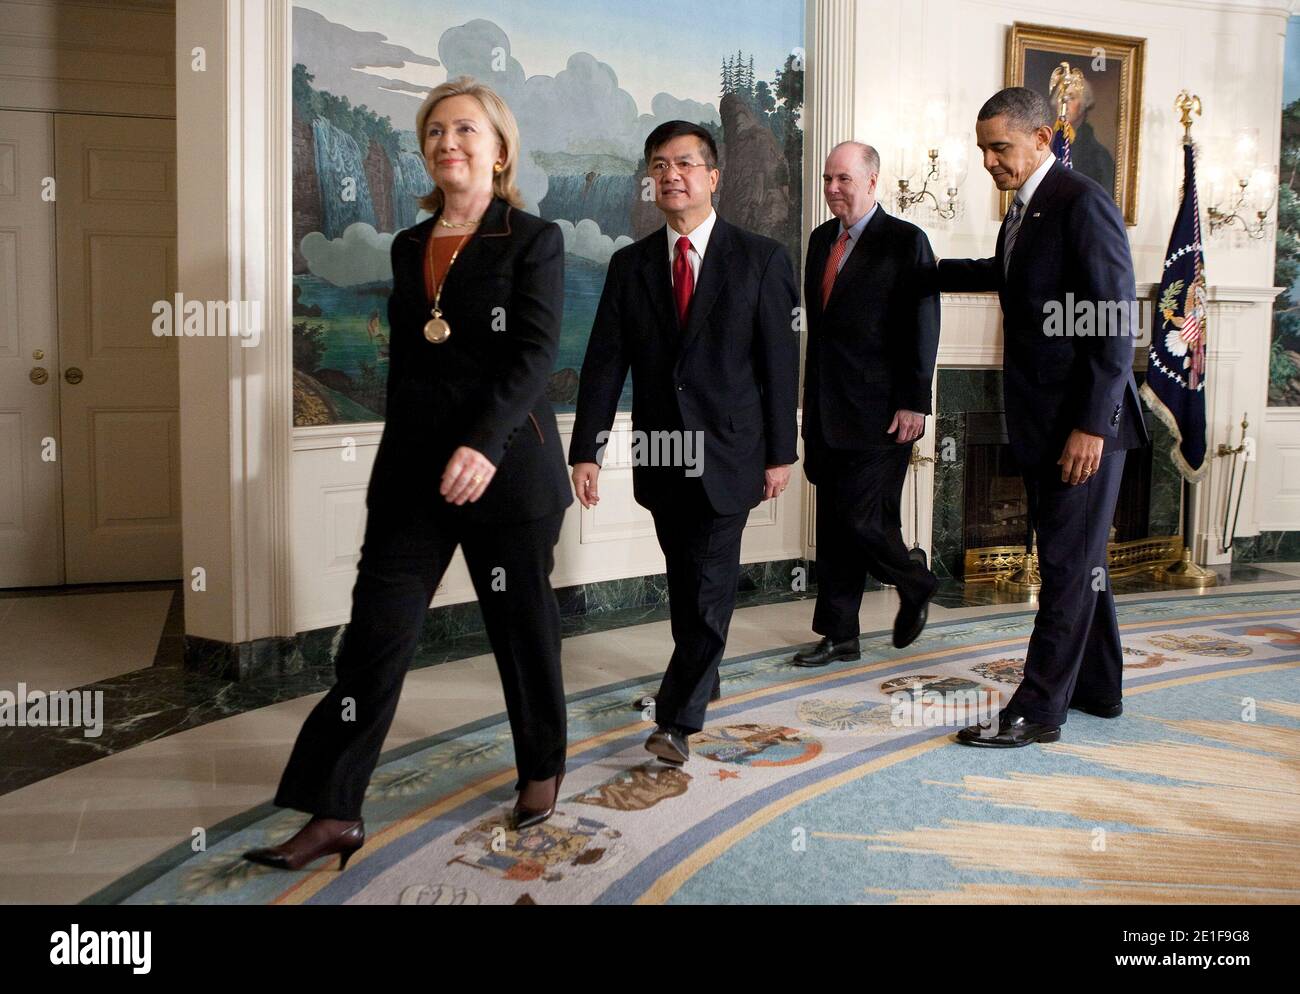 U.S. President Barack Obama, walks with Hillary Clinton, U.S. secretary of state, left, Gary Locke, secretary of commerce, and Tim Donilon, national security advisor, after announcing Locke's nomination to be the next U.S. ambassador to China at the White House in Washington, D.C., U.S., on March 9, 2011. If confirmed by the Senate, Locke would take over the diplomatic mission in a country that is a linchpin in Obama's trade policy. Photo by Joshua Roberts/Bloomberg News/ABACAUSA.COM Stock Photo